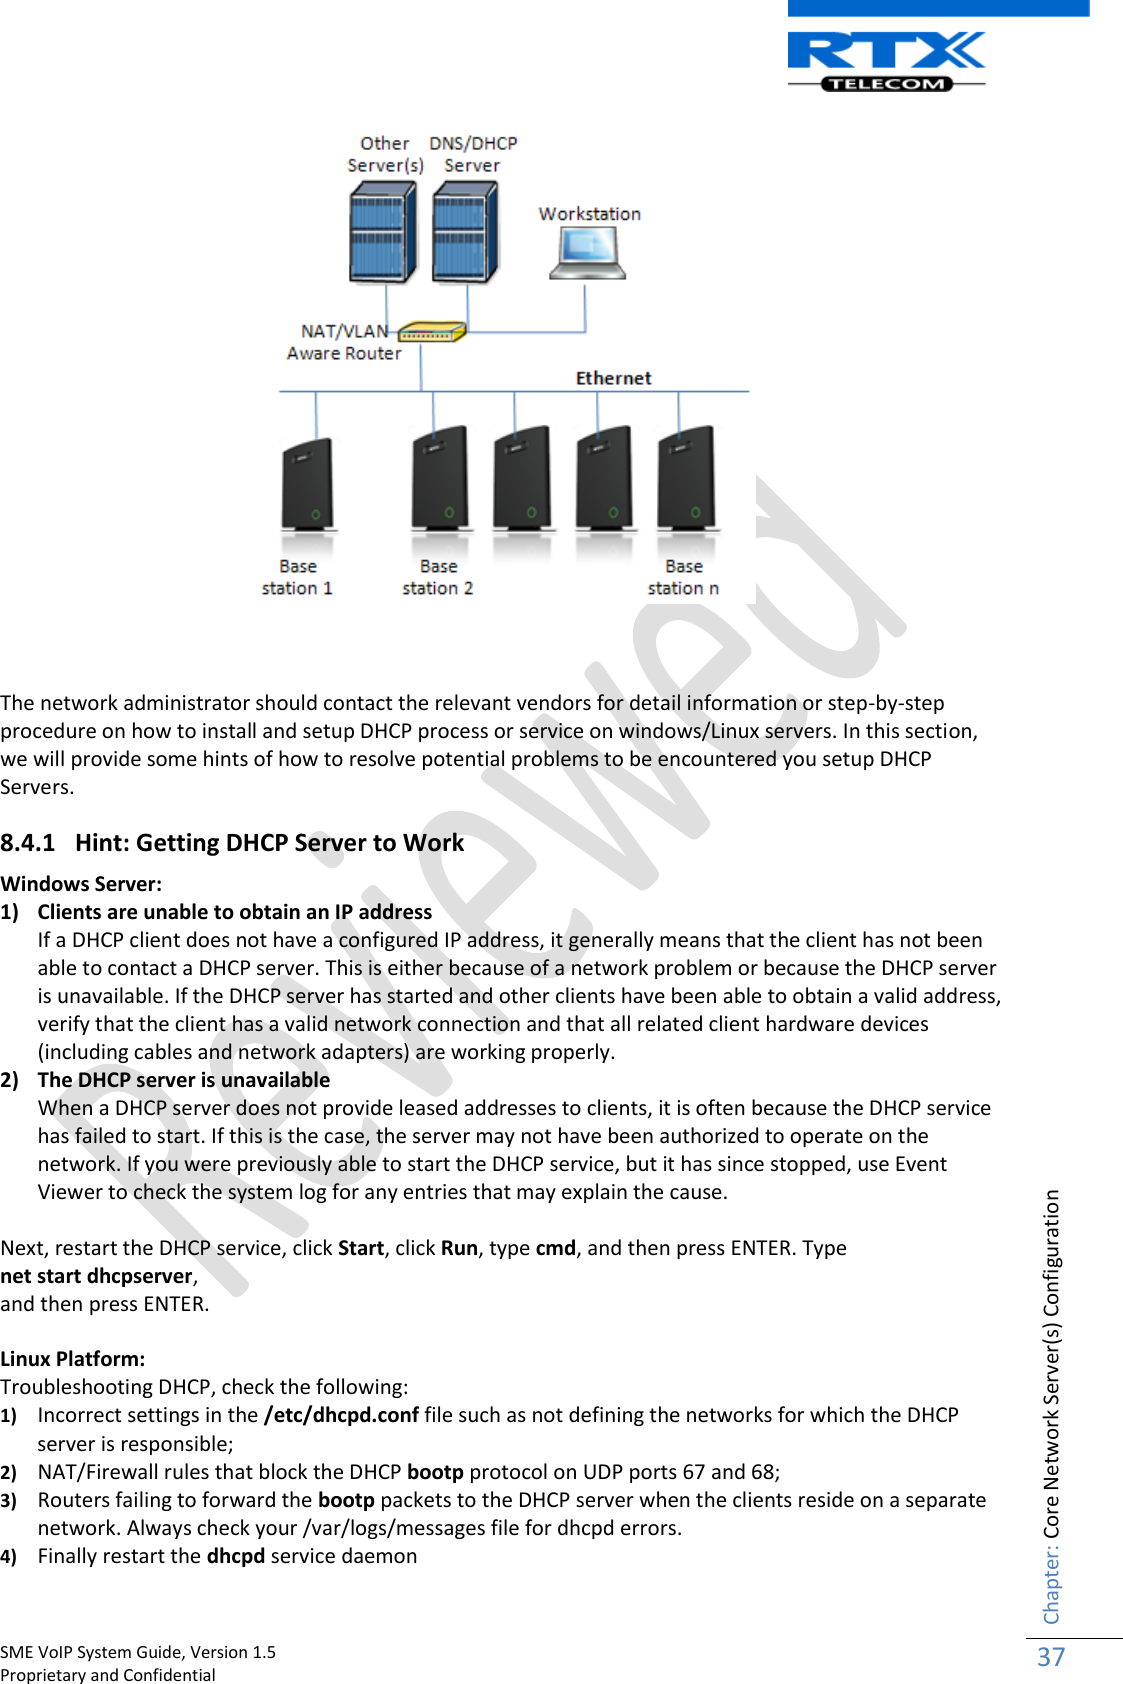    SME VoIP System Guide, Version 1.5                                                                                                                                                          Proprietary and Confidential    Chapter: Core Network Server(s) Configuration 37     The network administrator should contact the relevant vendors for detail information or step-by-step procedure on how to install and setup DHCP process or service on windows/Linux servers. In this section, we will provide some hints of how to resolve potential problems to be encountered you setup DHCP Servers. 8.4.1 Hint: Getting DHCP Server to Work  Windows Server:  1) Clients are unable to obtain an IP address If a DHCP client does not have a configured IP address, it generally means that the client has not been able to contact a DHCP server. This is either because of a network problem or because the DHCP server is unavailable. If the DHCP server has started and other clients have been able to obtain a valid address, verify that the client has a valid network connection and that all related client hardware devices (including cables and network adapters) are working properly. 2) The DHCP server is unavailable When a DHCP server does not provide leased addresses to clients, it is often because the DHCP service has failed to start. If this is the case, the server may not have been authorized to operate on the network. If you were previously able to start the DHCP service, but it has since stopped, use Event Viewer to check the system log for any entries that may explain the cause.  Next, restart the DHCP service, click Start, click Run, type cmd, and then press ENTER. Type  net start dhcpserver,  and then press ENTER.  Linux Platform: Troubleshooting DHCP, check the following: 1) Incorrect settings in the /etc/dhcpd.conf file such as not defining the networks for which the DHCP server is responsible;  2) NAT/Firewall rules that block the DHCP bootp protocol on UDP ports 67 and 68;  3) Routers failing to forward the bootp packets to the DHCP server when the clients reside on a separate network. Always check your /var/logs/messages file for dhcpd errors. 4) Finally restart the dhcpd service daemon 